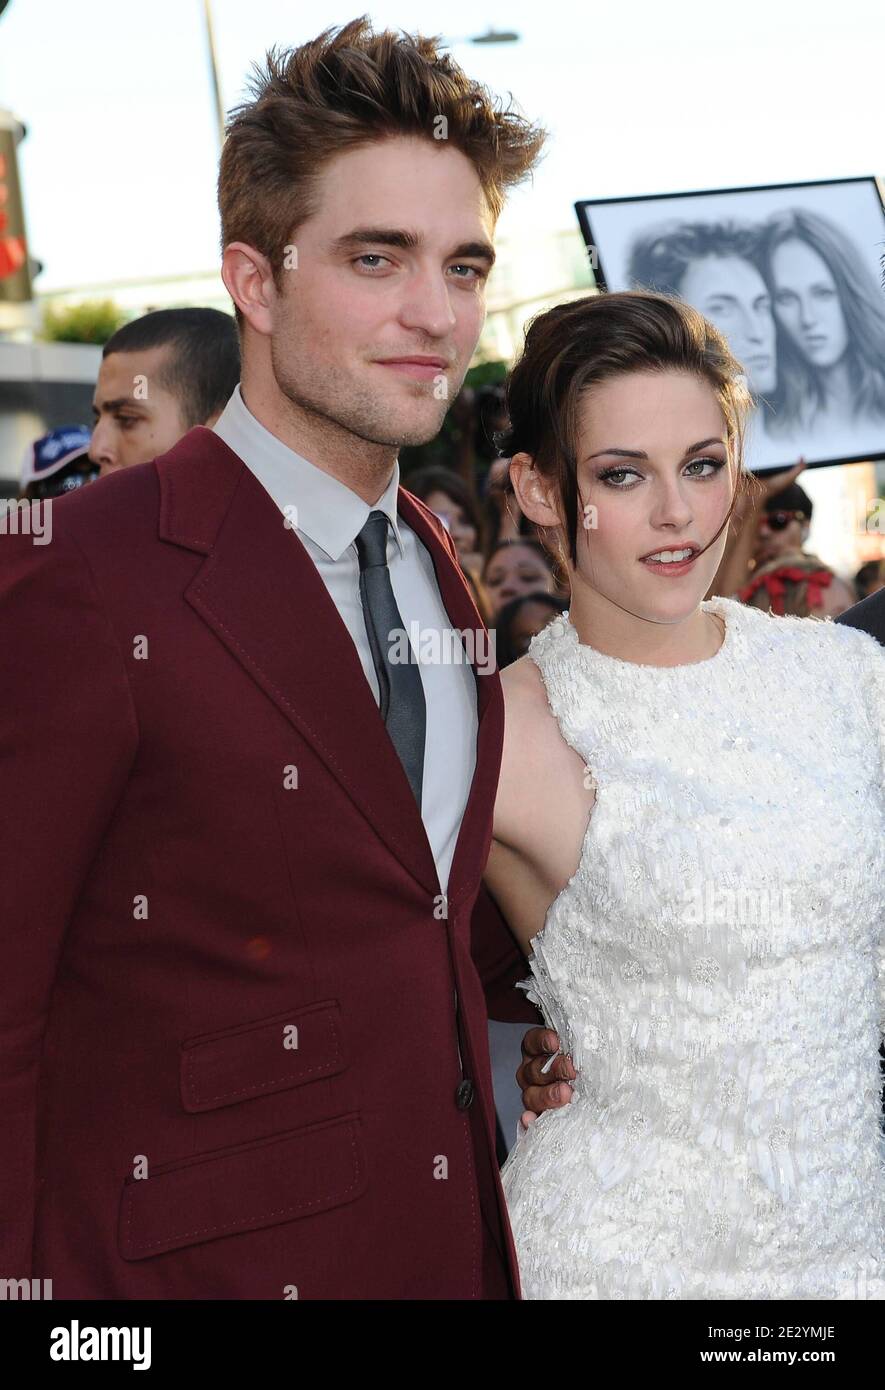 'Robert Pattinson and Kristen Stewart attend the premiere of ''The Twilight Saga: Eclipse'' part of the 2010 Los Angeles Film Festival. Los Angeles, June 24, 2010. (Pictured : Robert Pattinson, Kristen Stewart). Photo by Lionel Hahn/ABACAPRESS.COM' Stock Photo